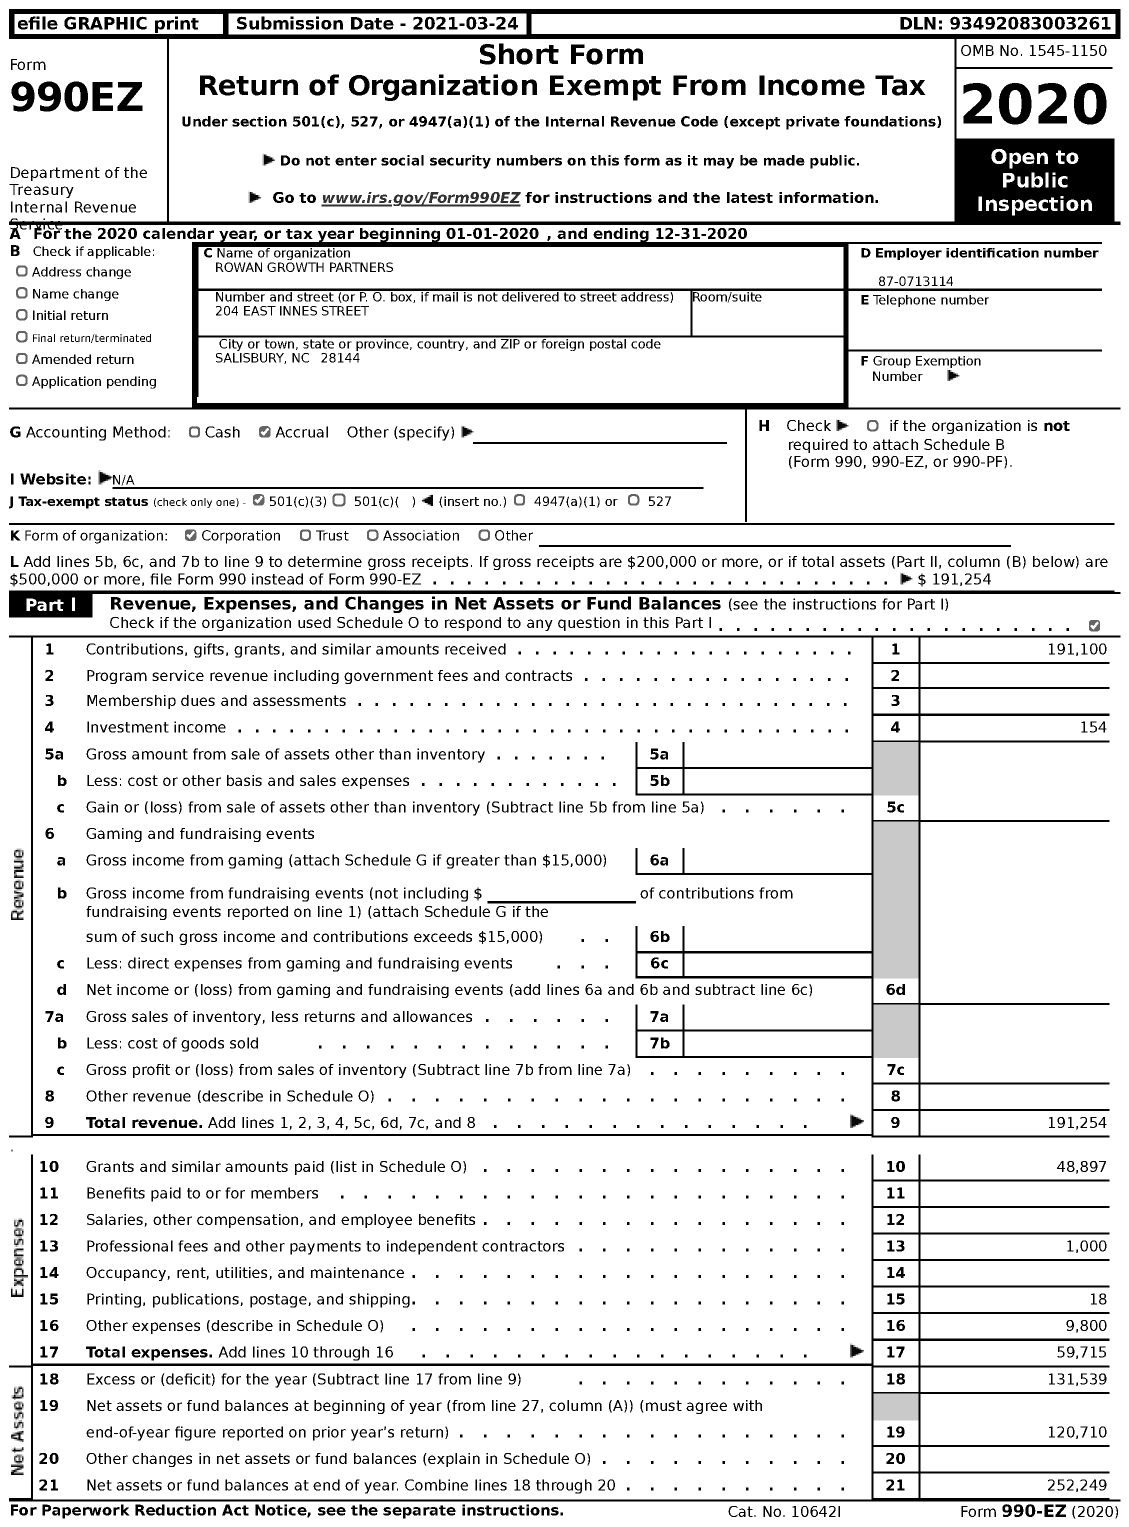 Image of first page of 2020 Form 990EZ for Rowan Growth Partners